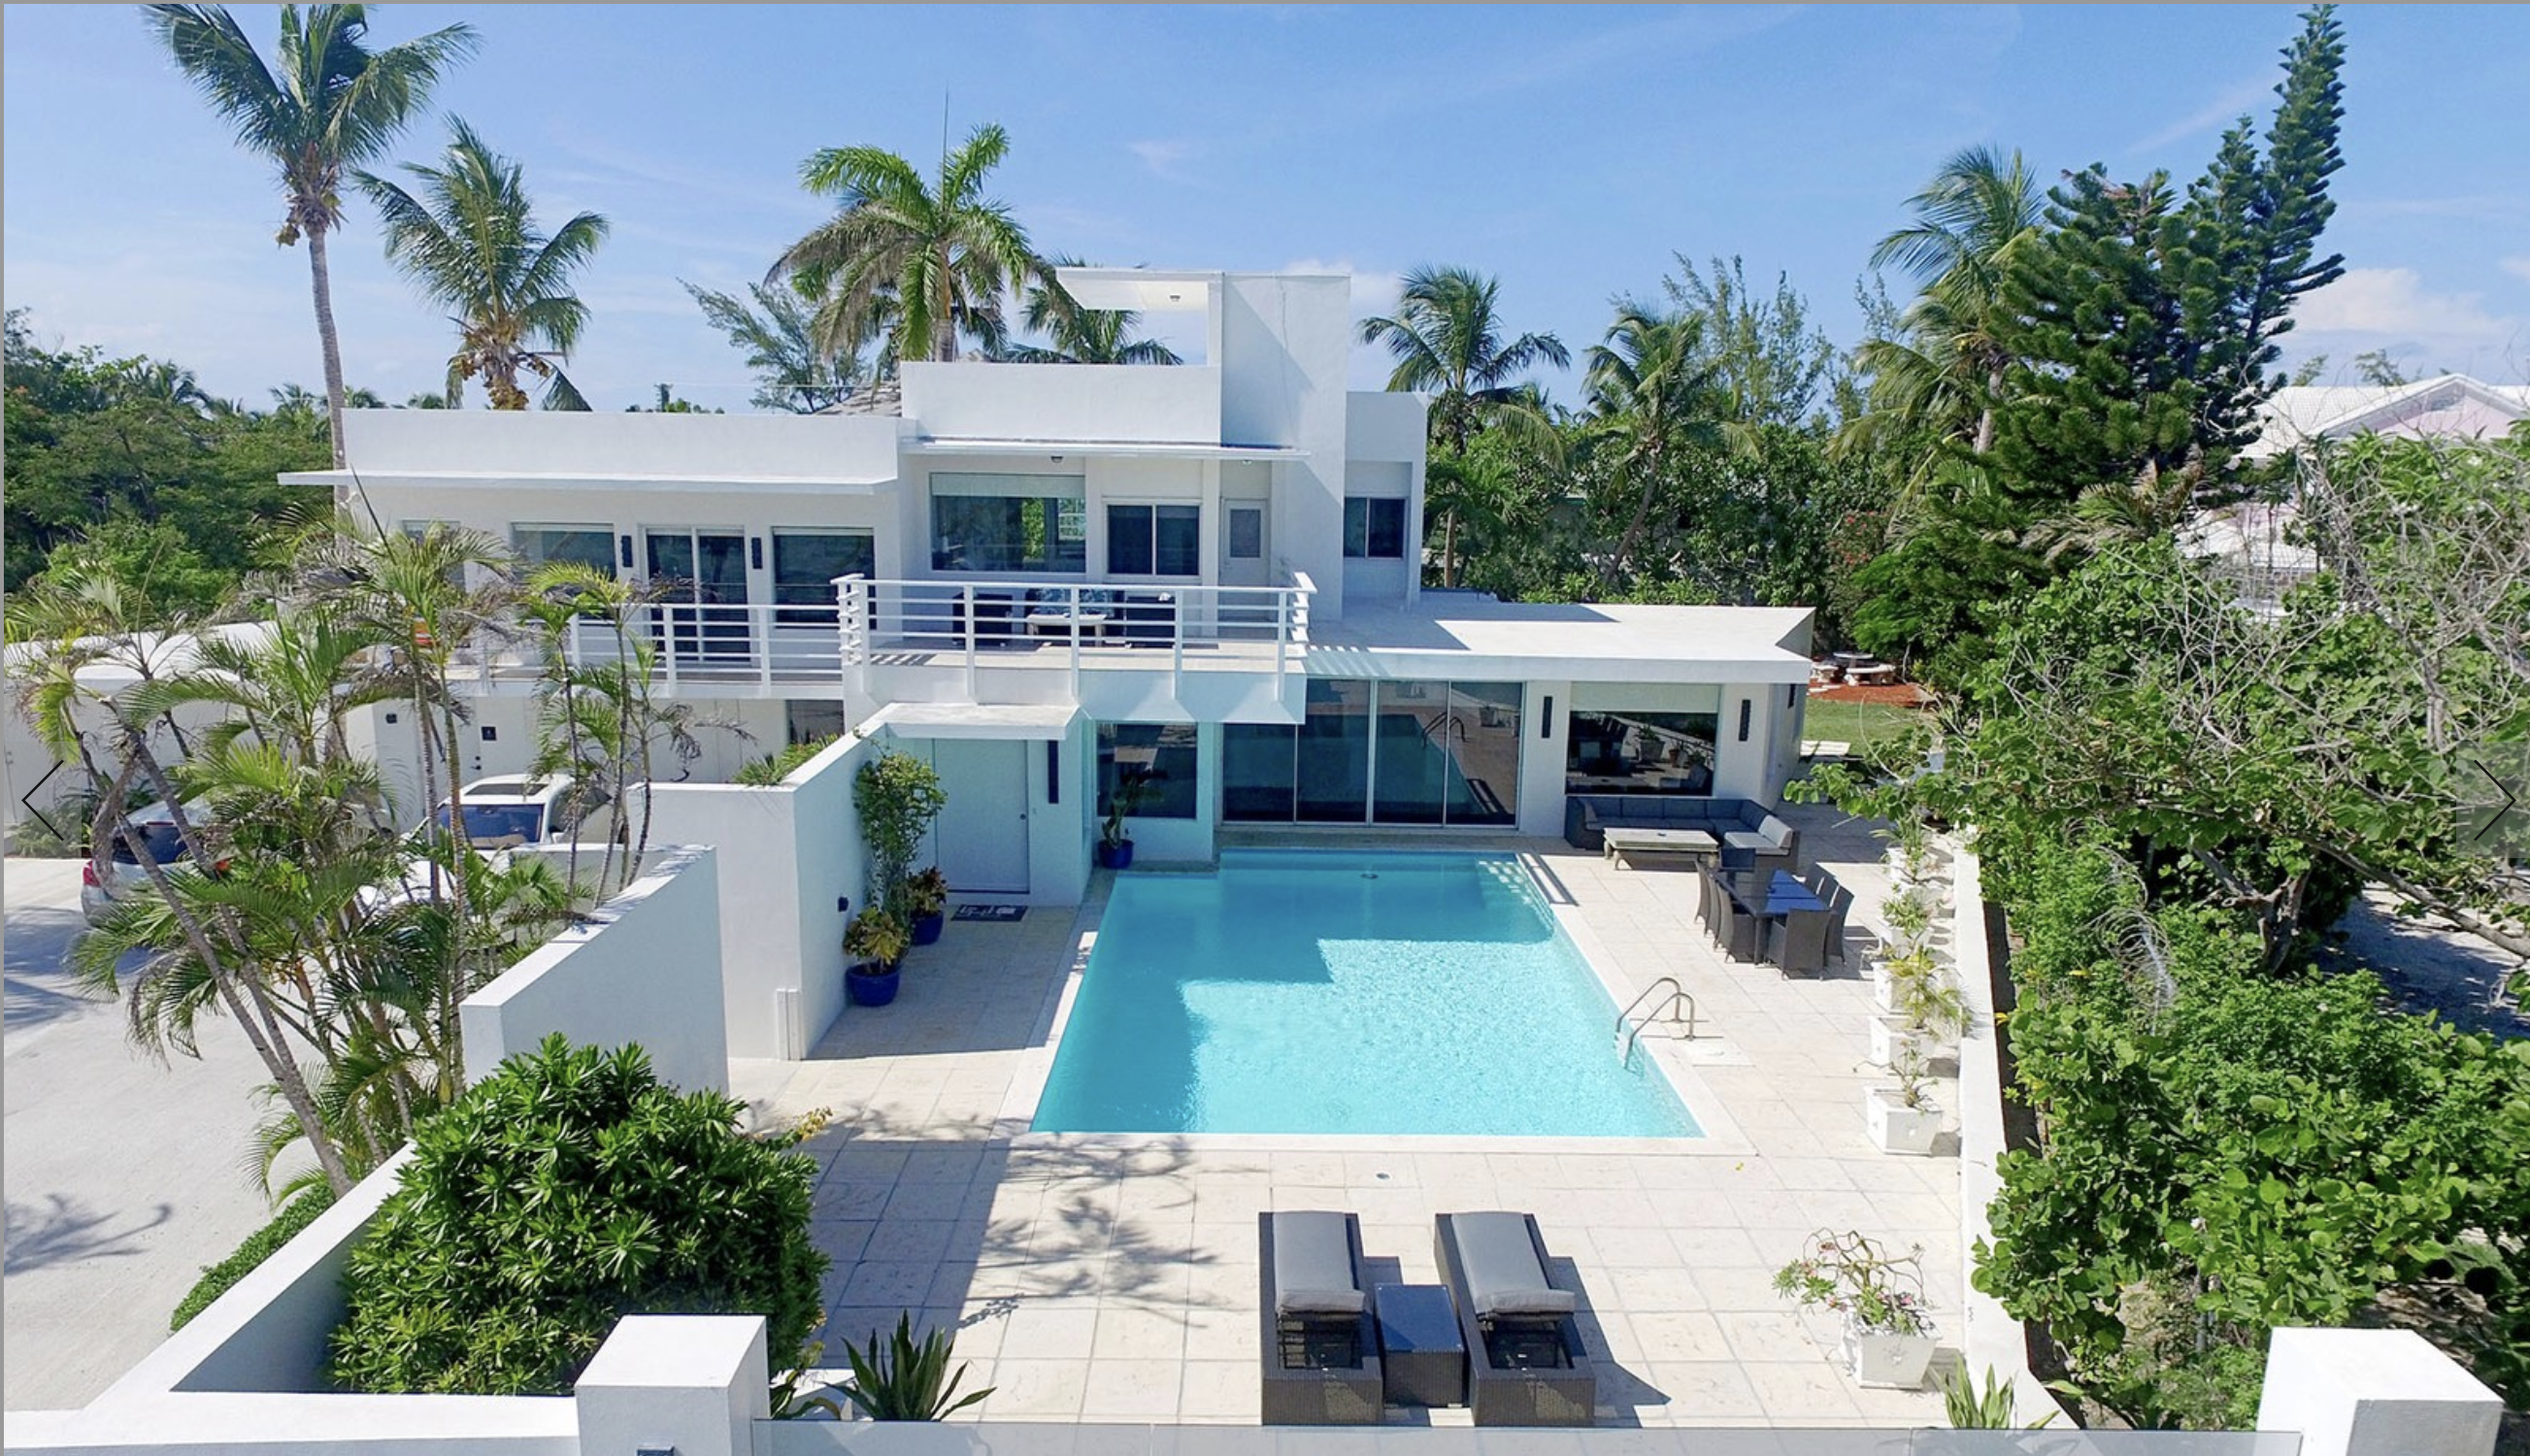 buy belize real estate with bitcoin